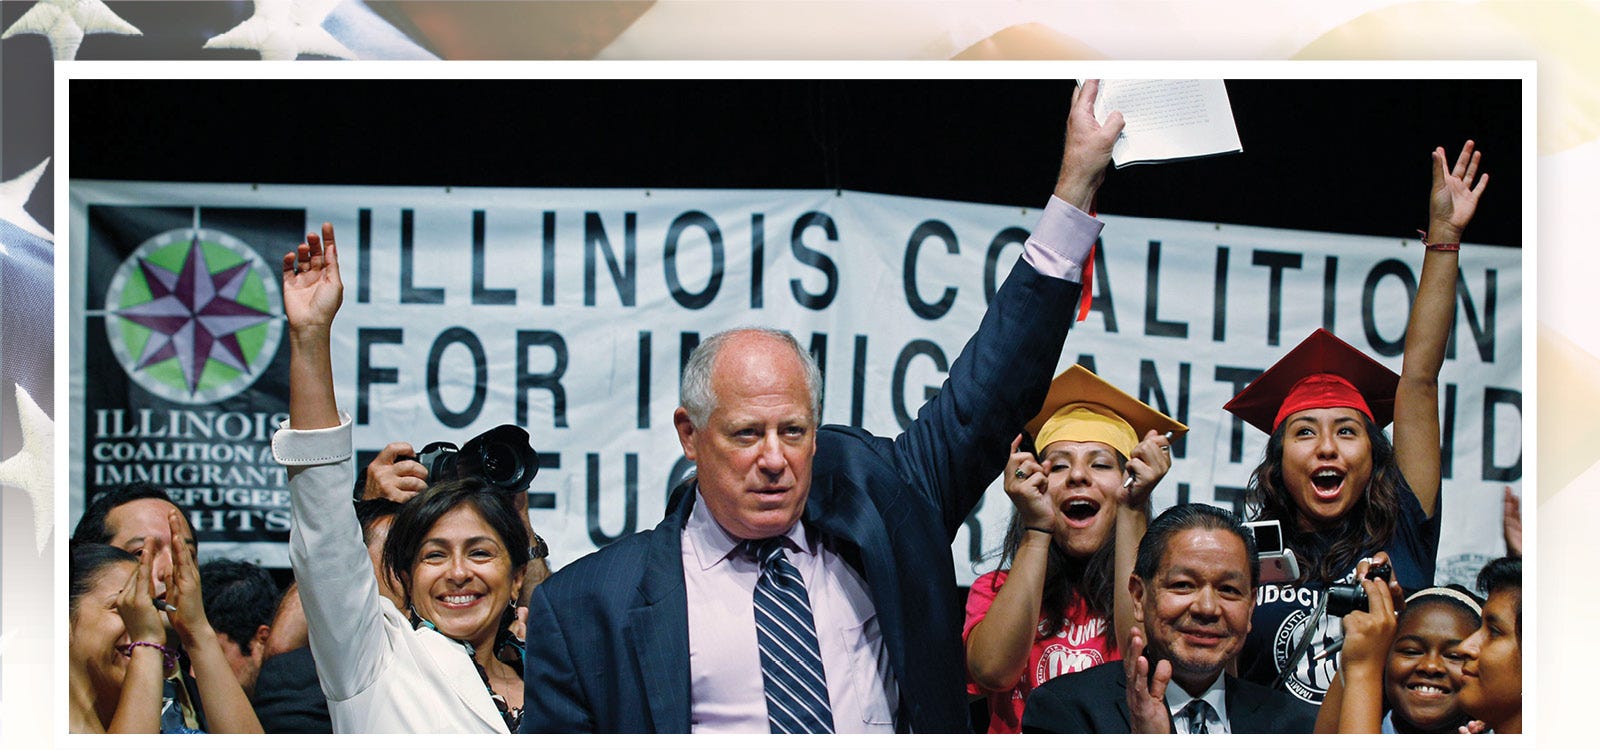 Then-Illinois Gov. Pat Quinn celebrates with students and supporters after signing the Illinois Dream Act into law, Aug. 1, 2011, at a Latino neighborhood high school in Chicago. The Illinois law gave undocumented immigrants access to private scholarships for college.